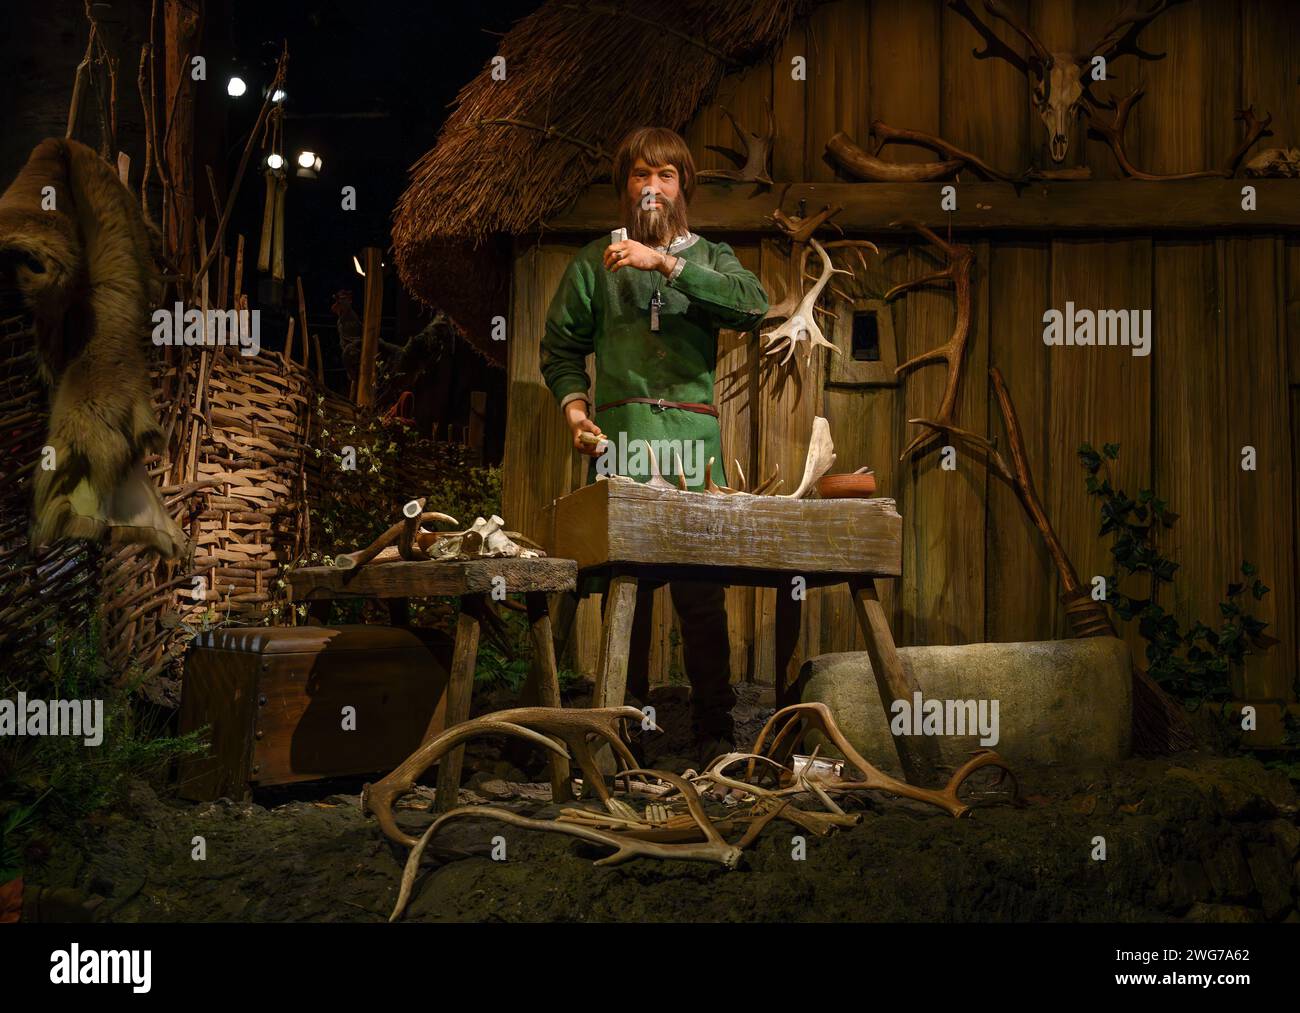 Jorvik Centre. An animatronic figure of a viking in the Jorvik Viking Centre, York, England. He is making items such as combs out of deer antlers. Stock Photo